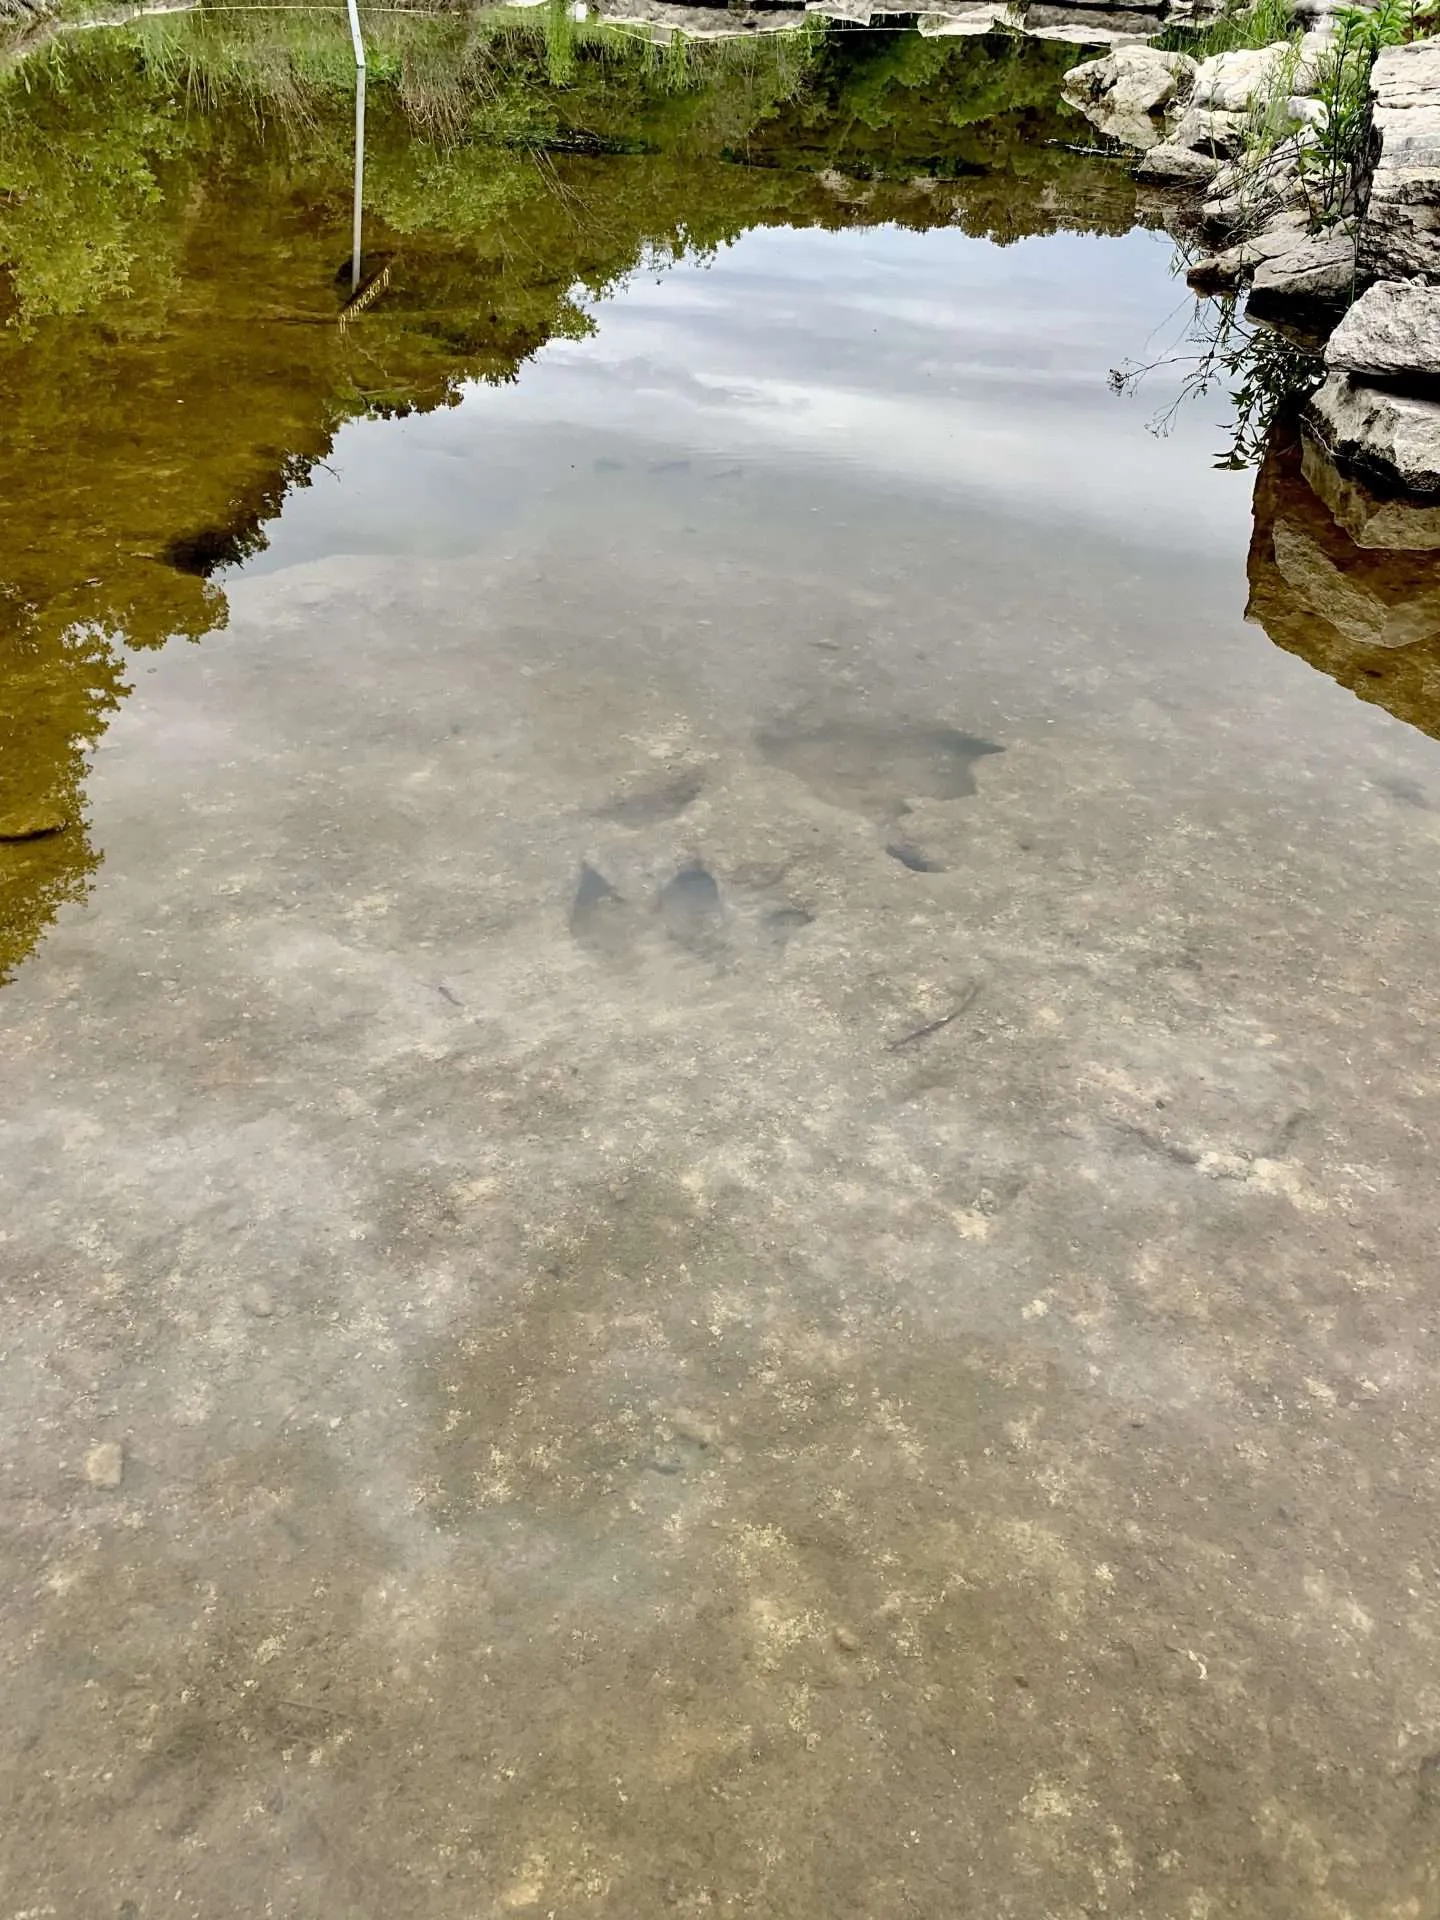 Fossilized dinosaur footprints in the bottom of a river in Texas